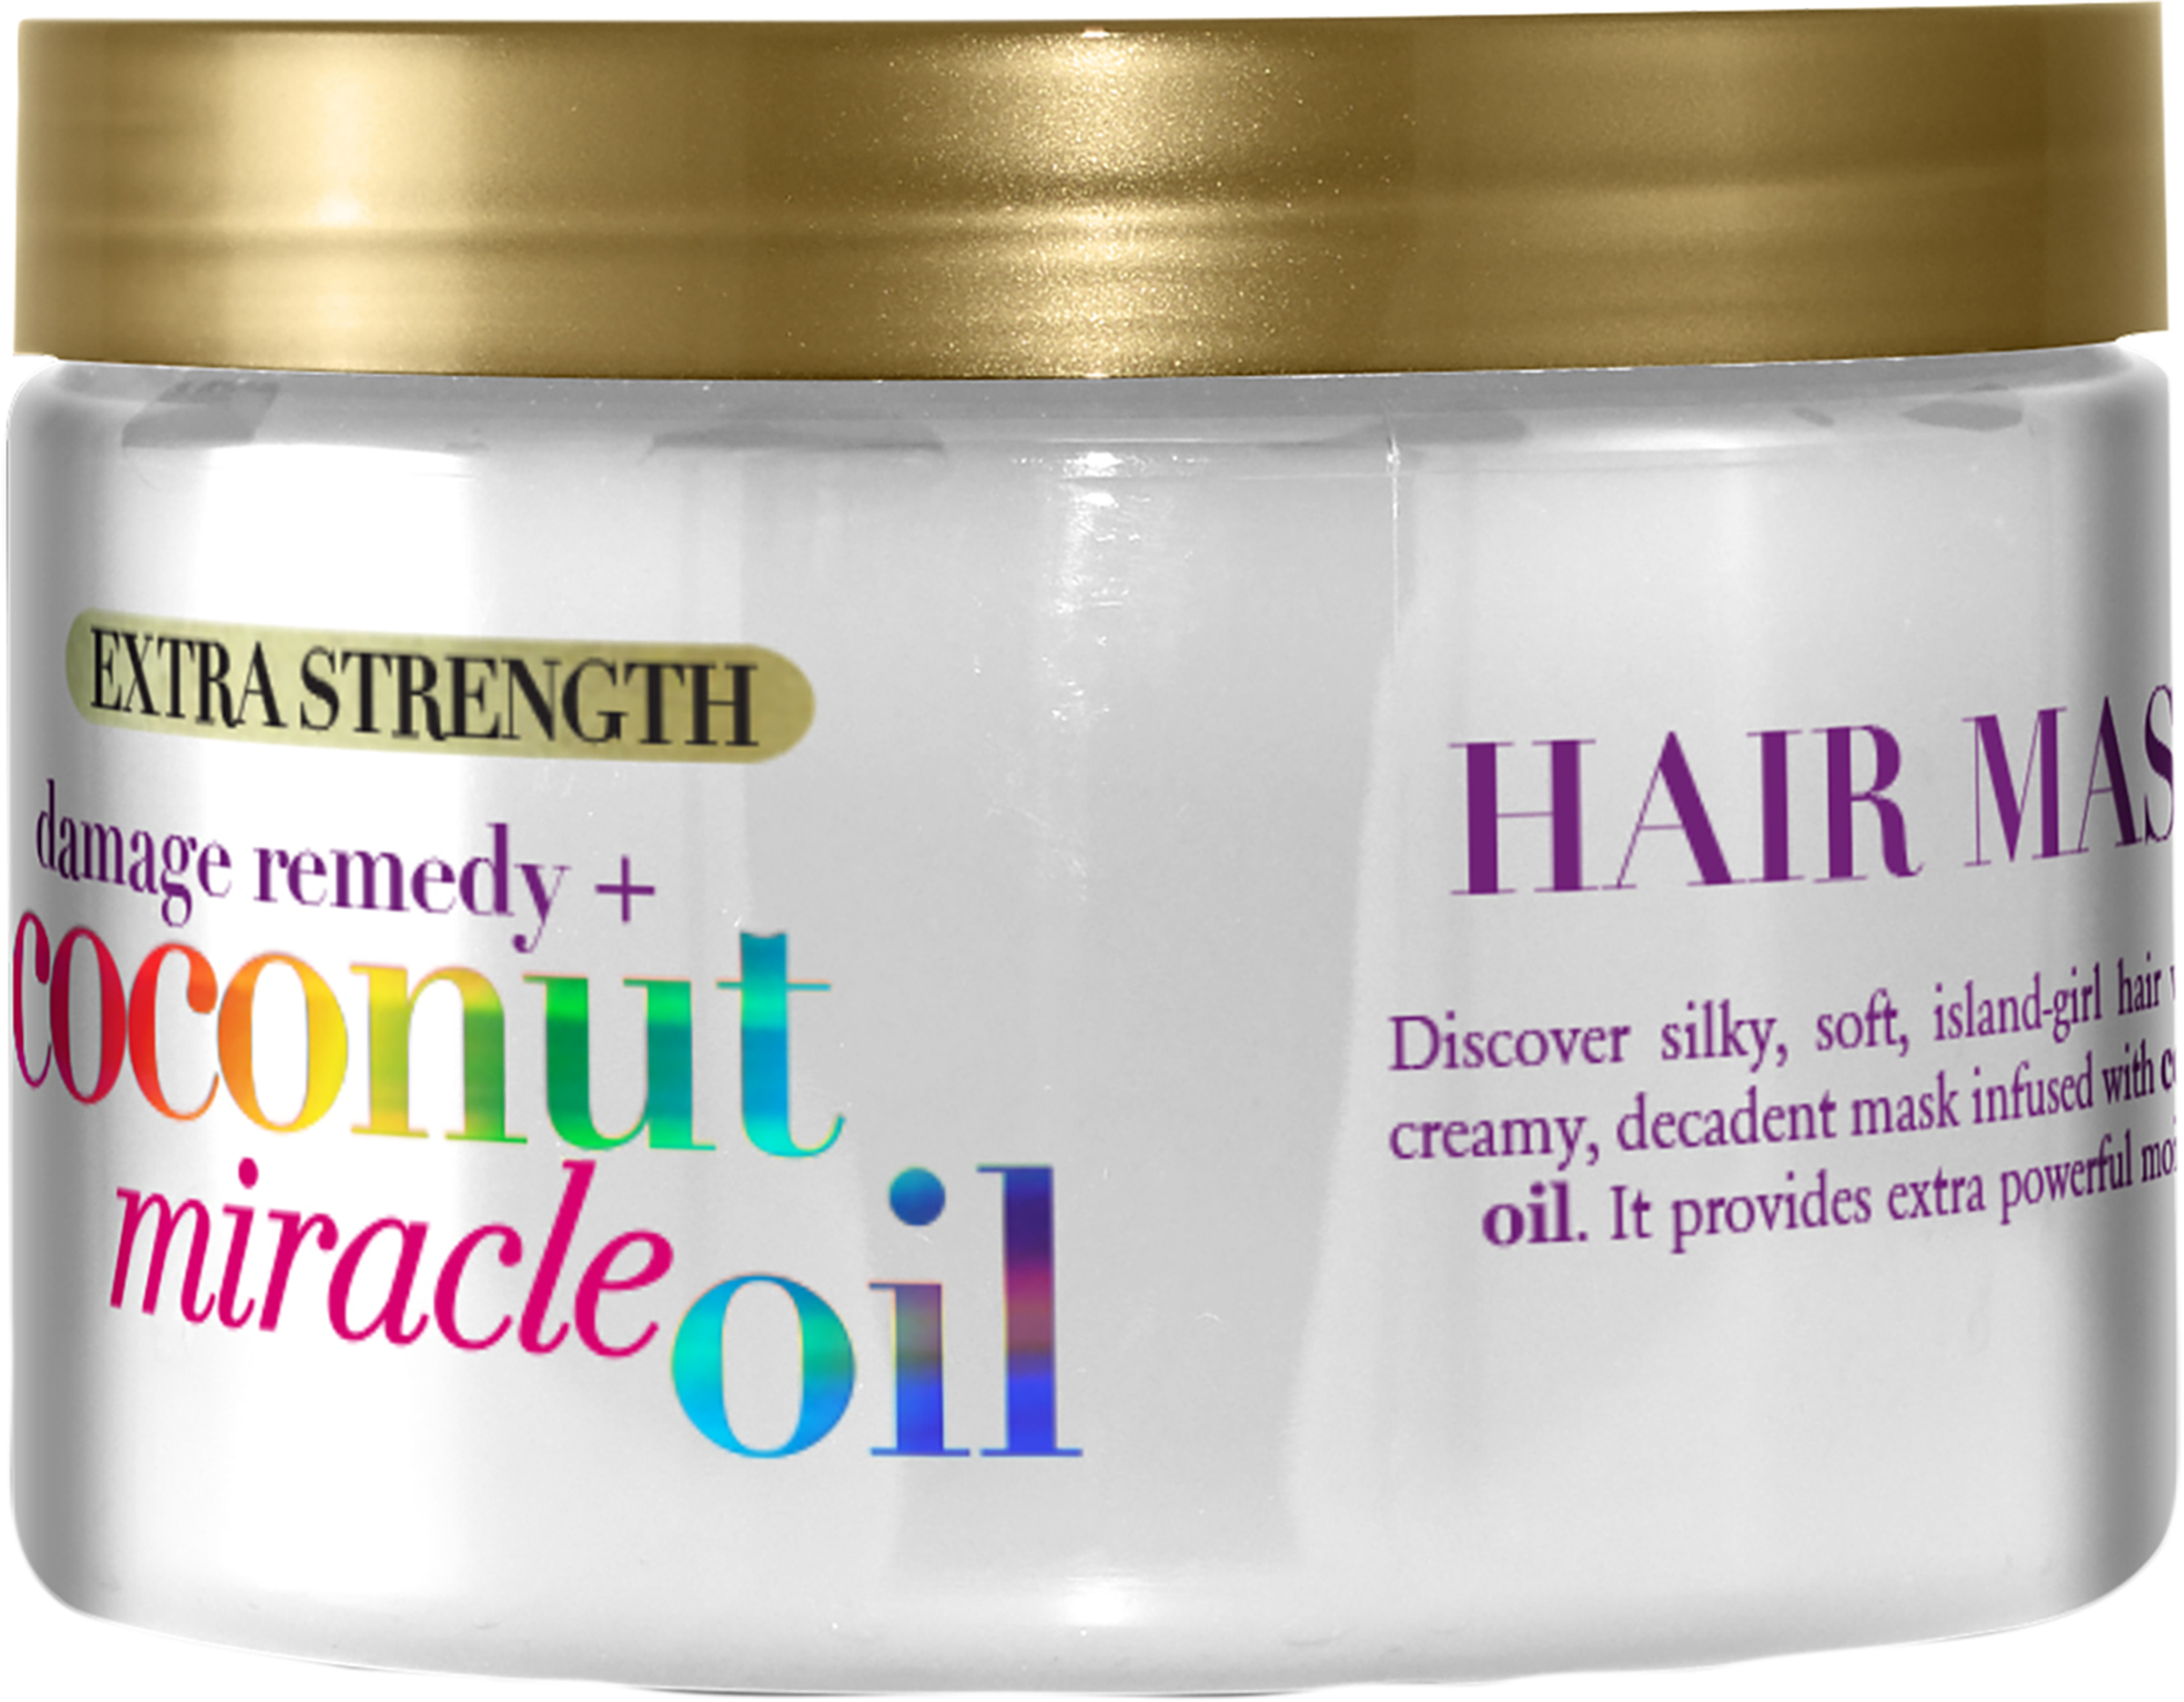 OGX Coconut Miracle Oil Hair Mask 168 g